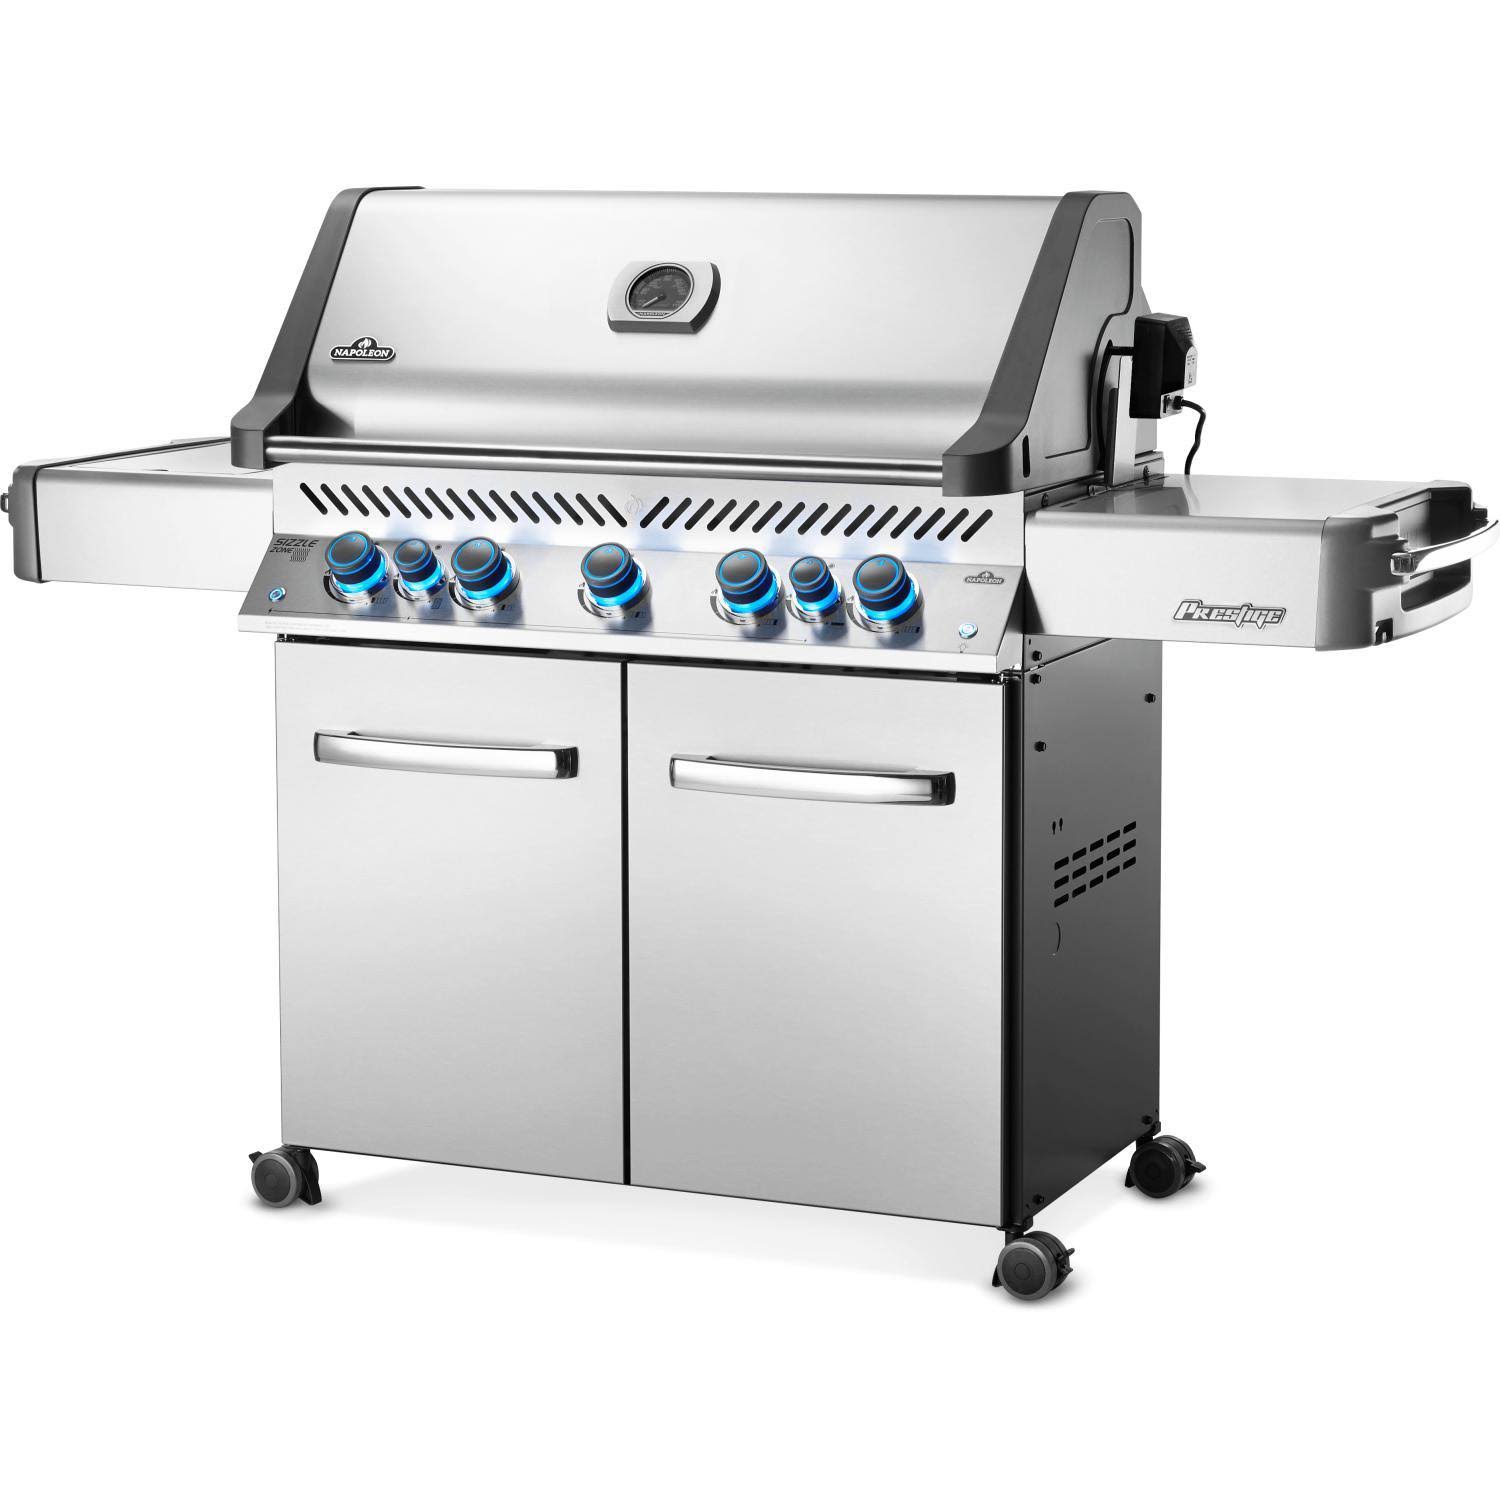 Napoleon P665RSIBPSS Prestige 665 Infrared Side and Rear Burners Grill - Silver, 75"